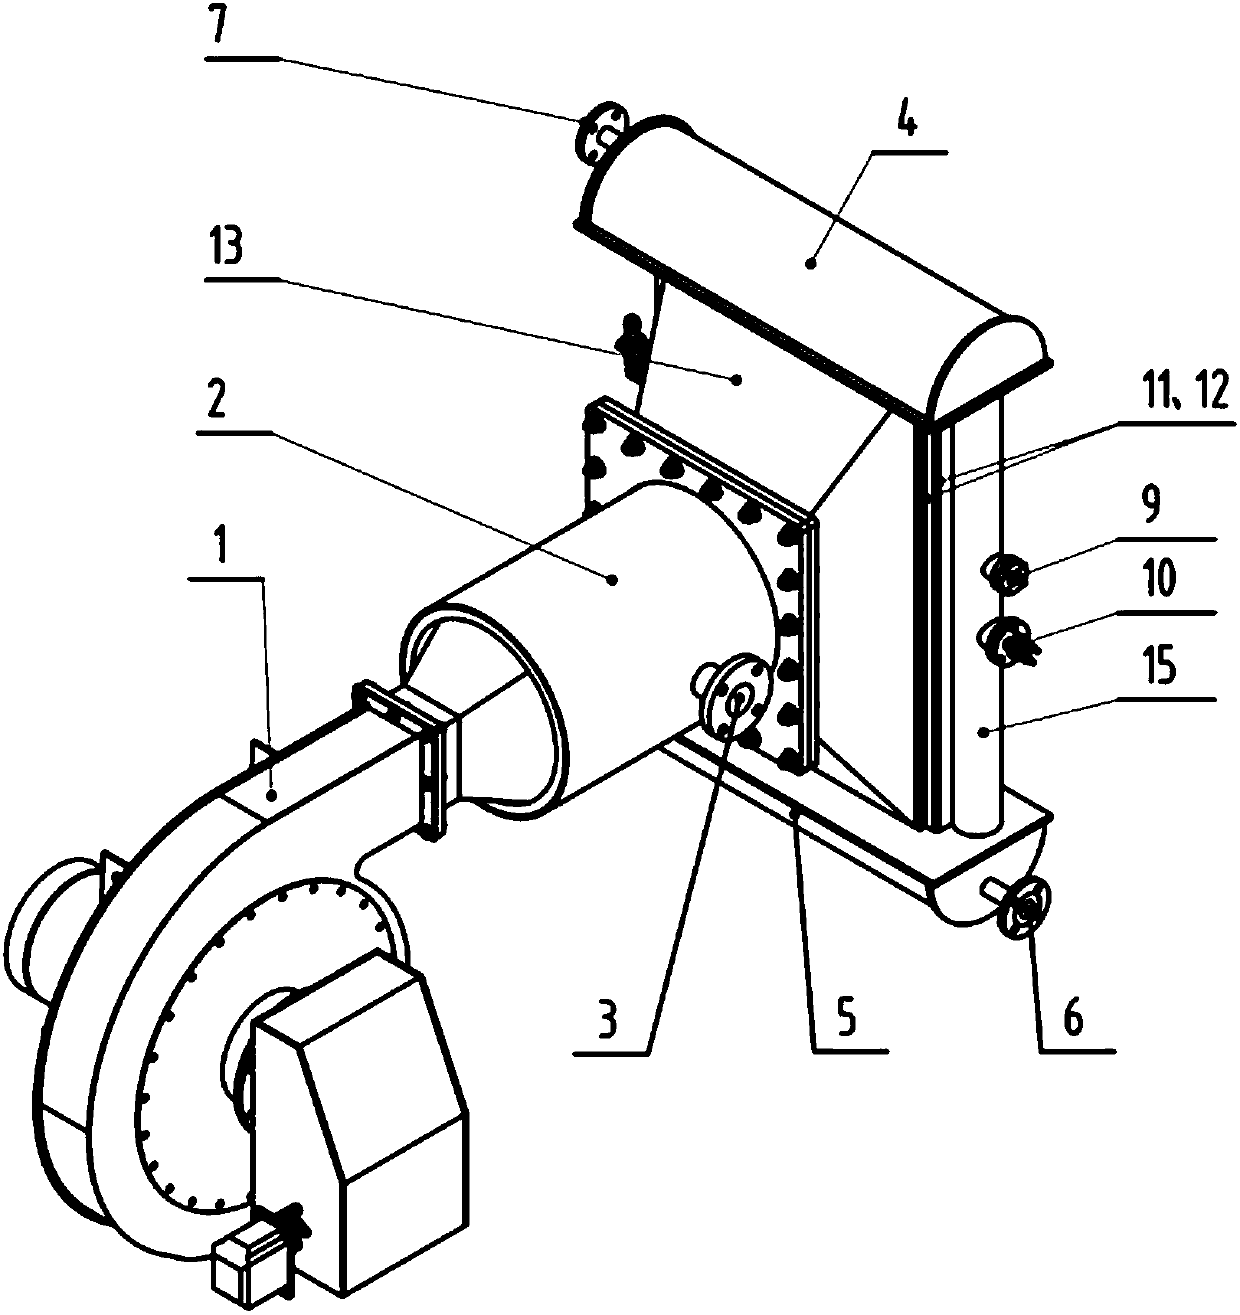 Slot type flame combustion device